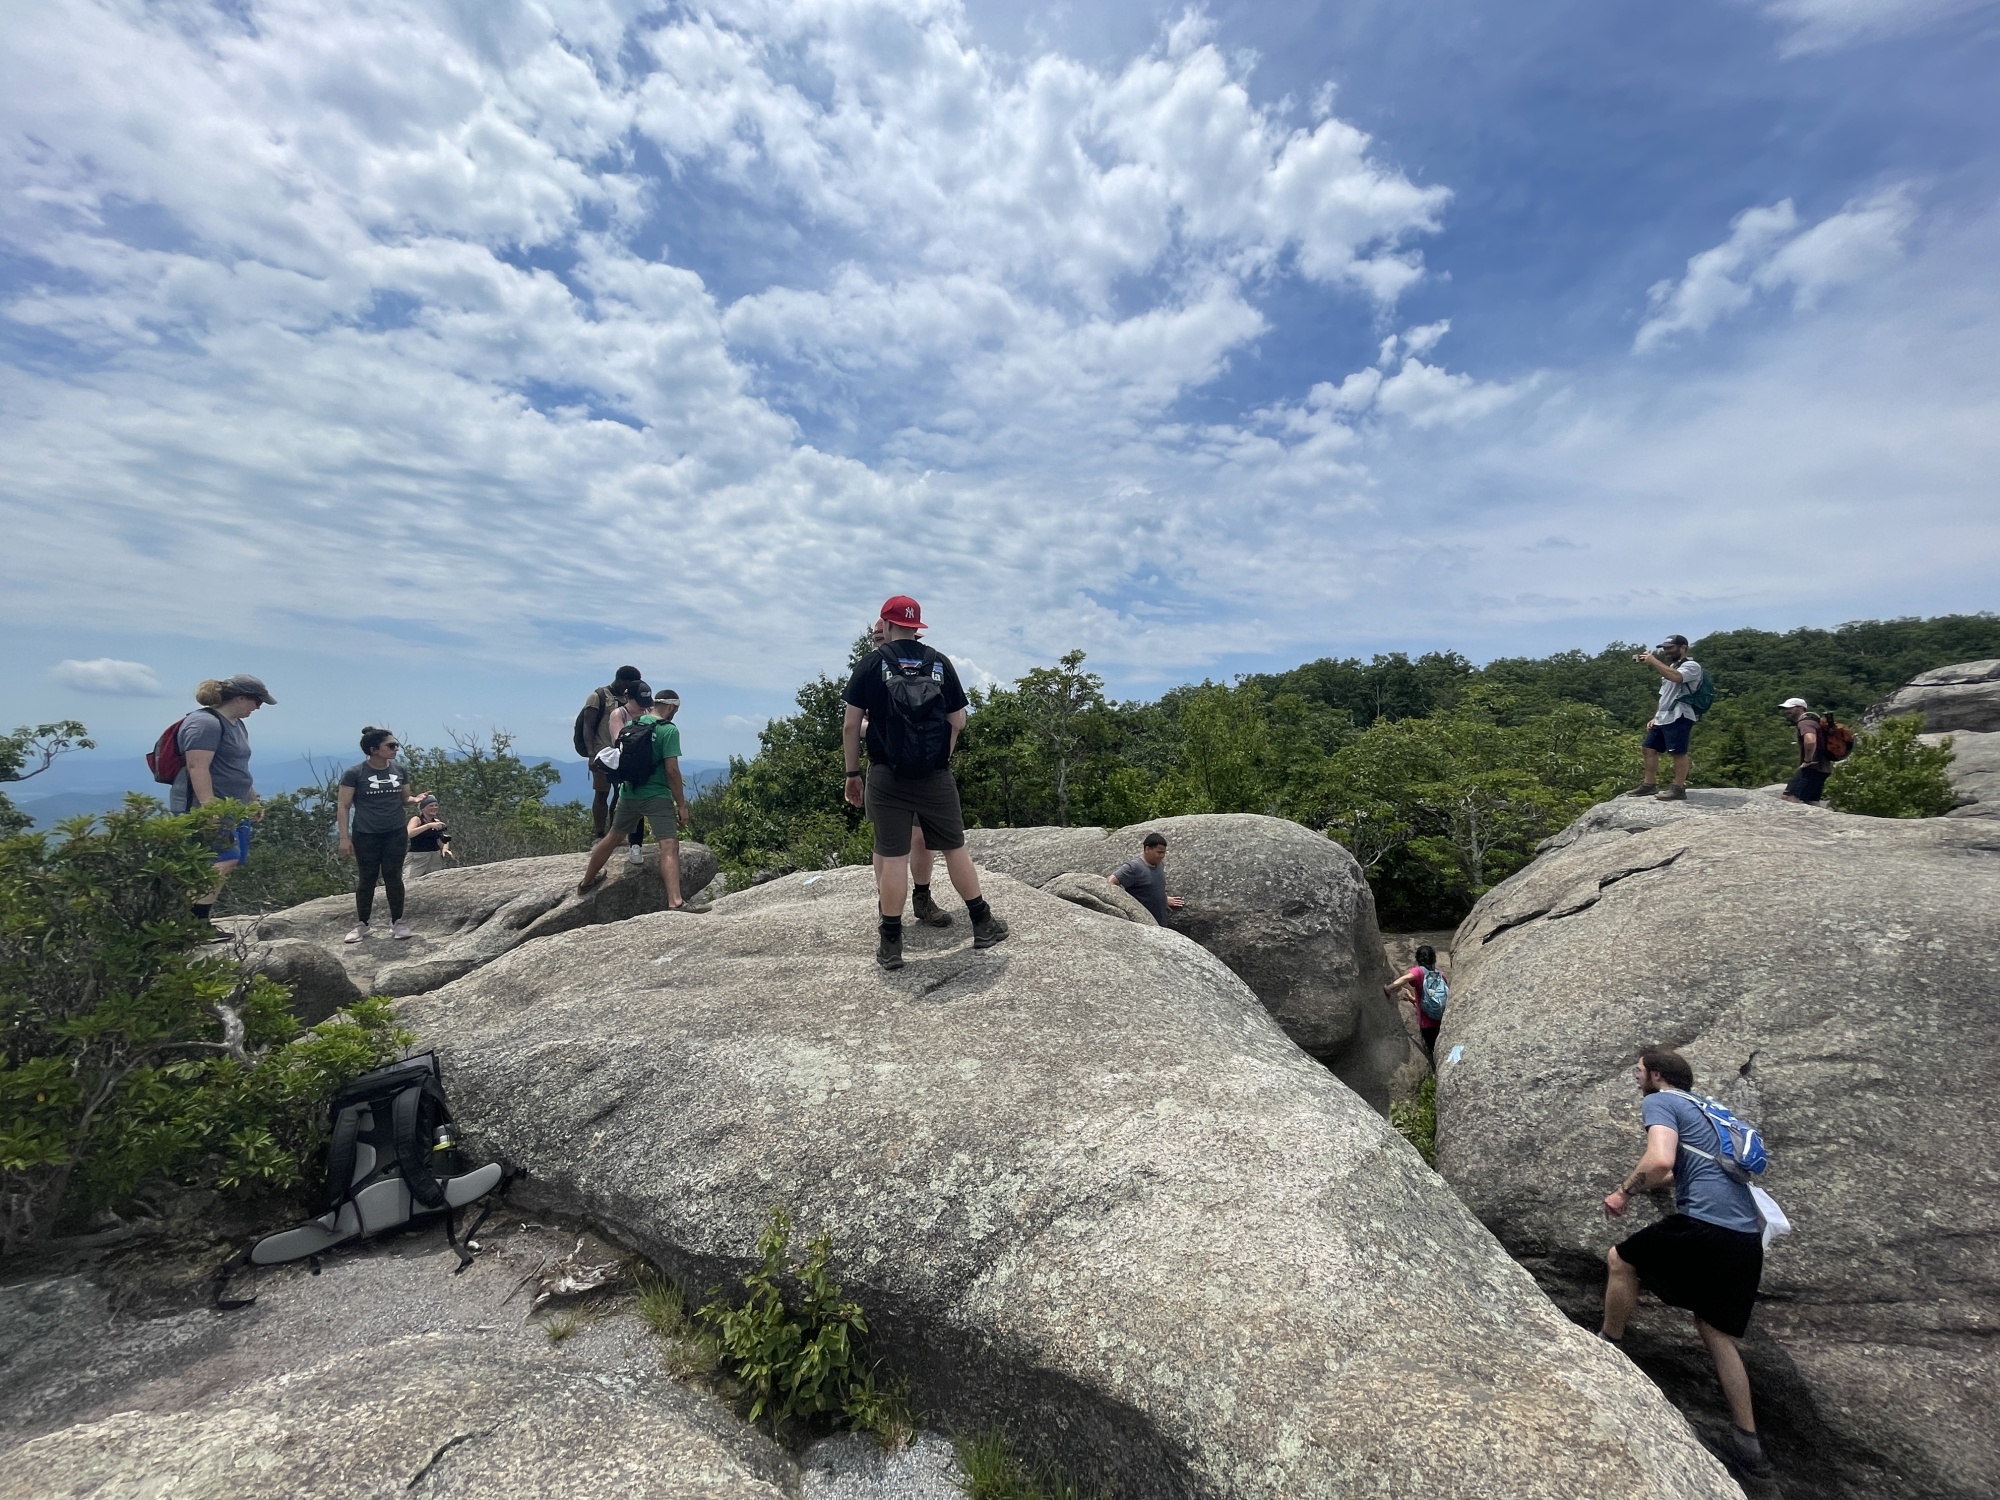 A crowd of hikers navigating a rock scramble on Old Rag.